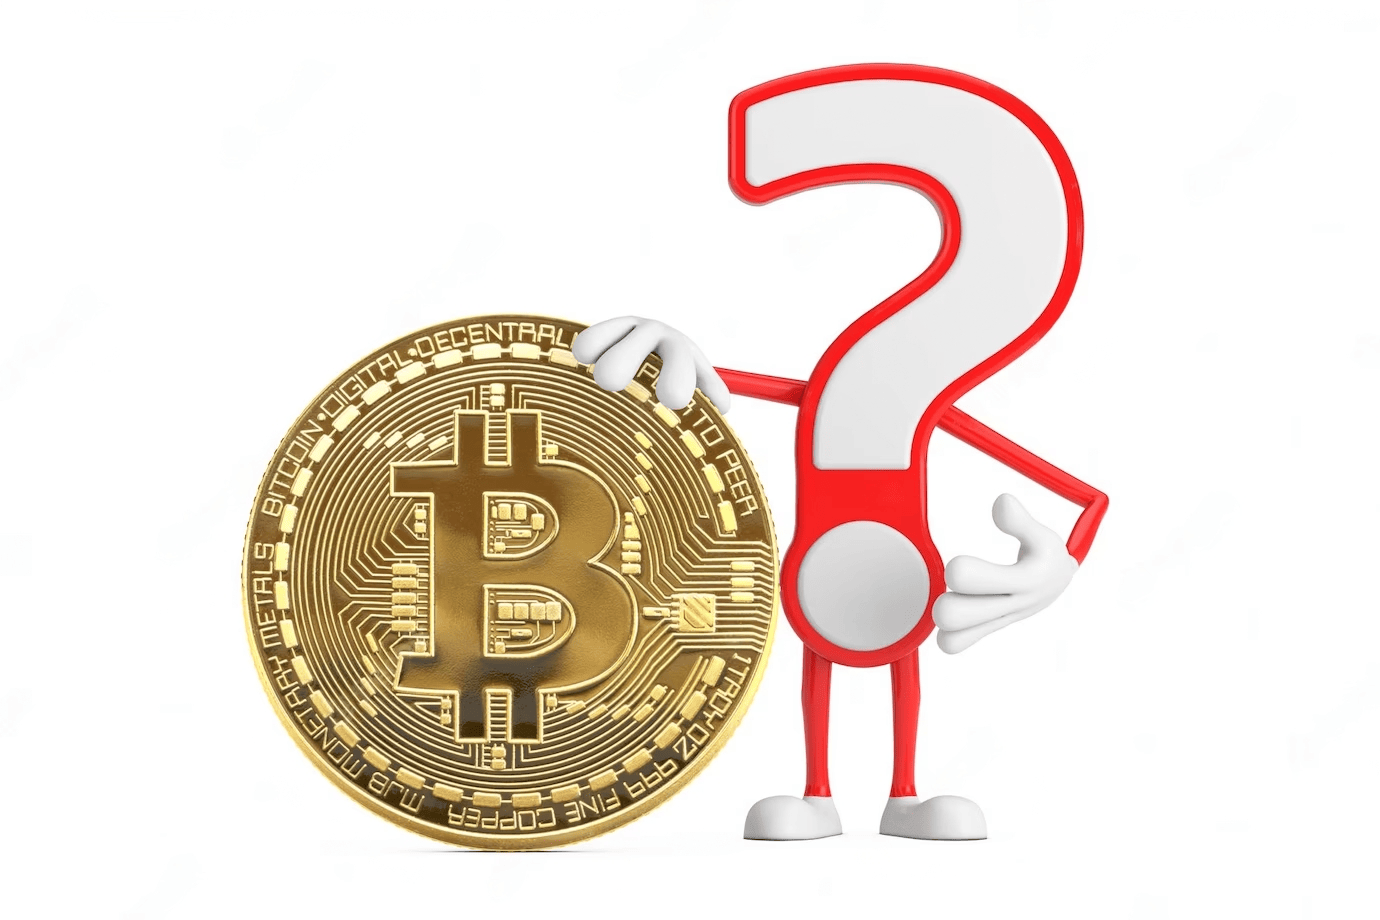 What not to do with Bitcoin?